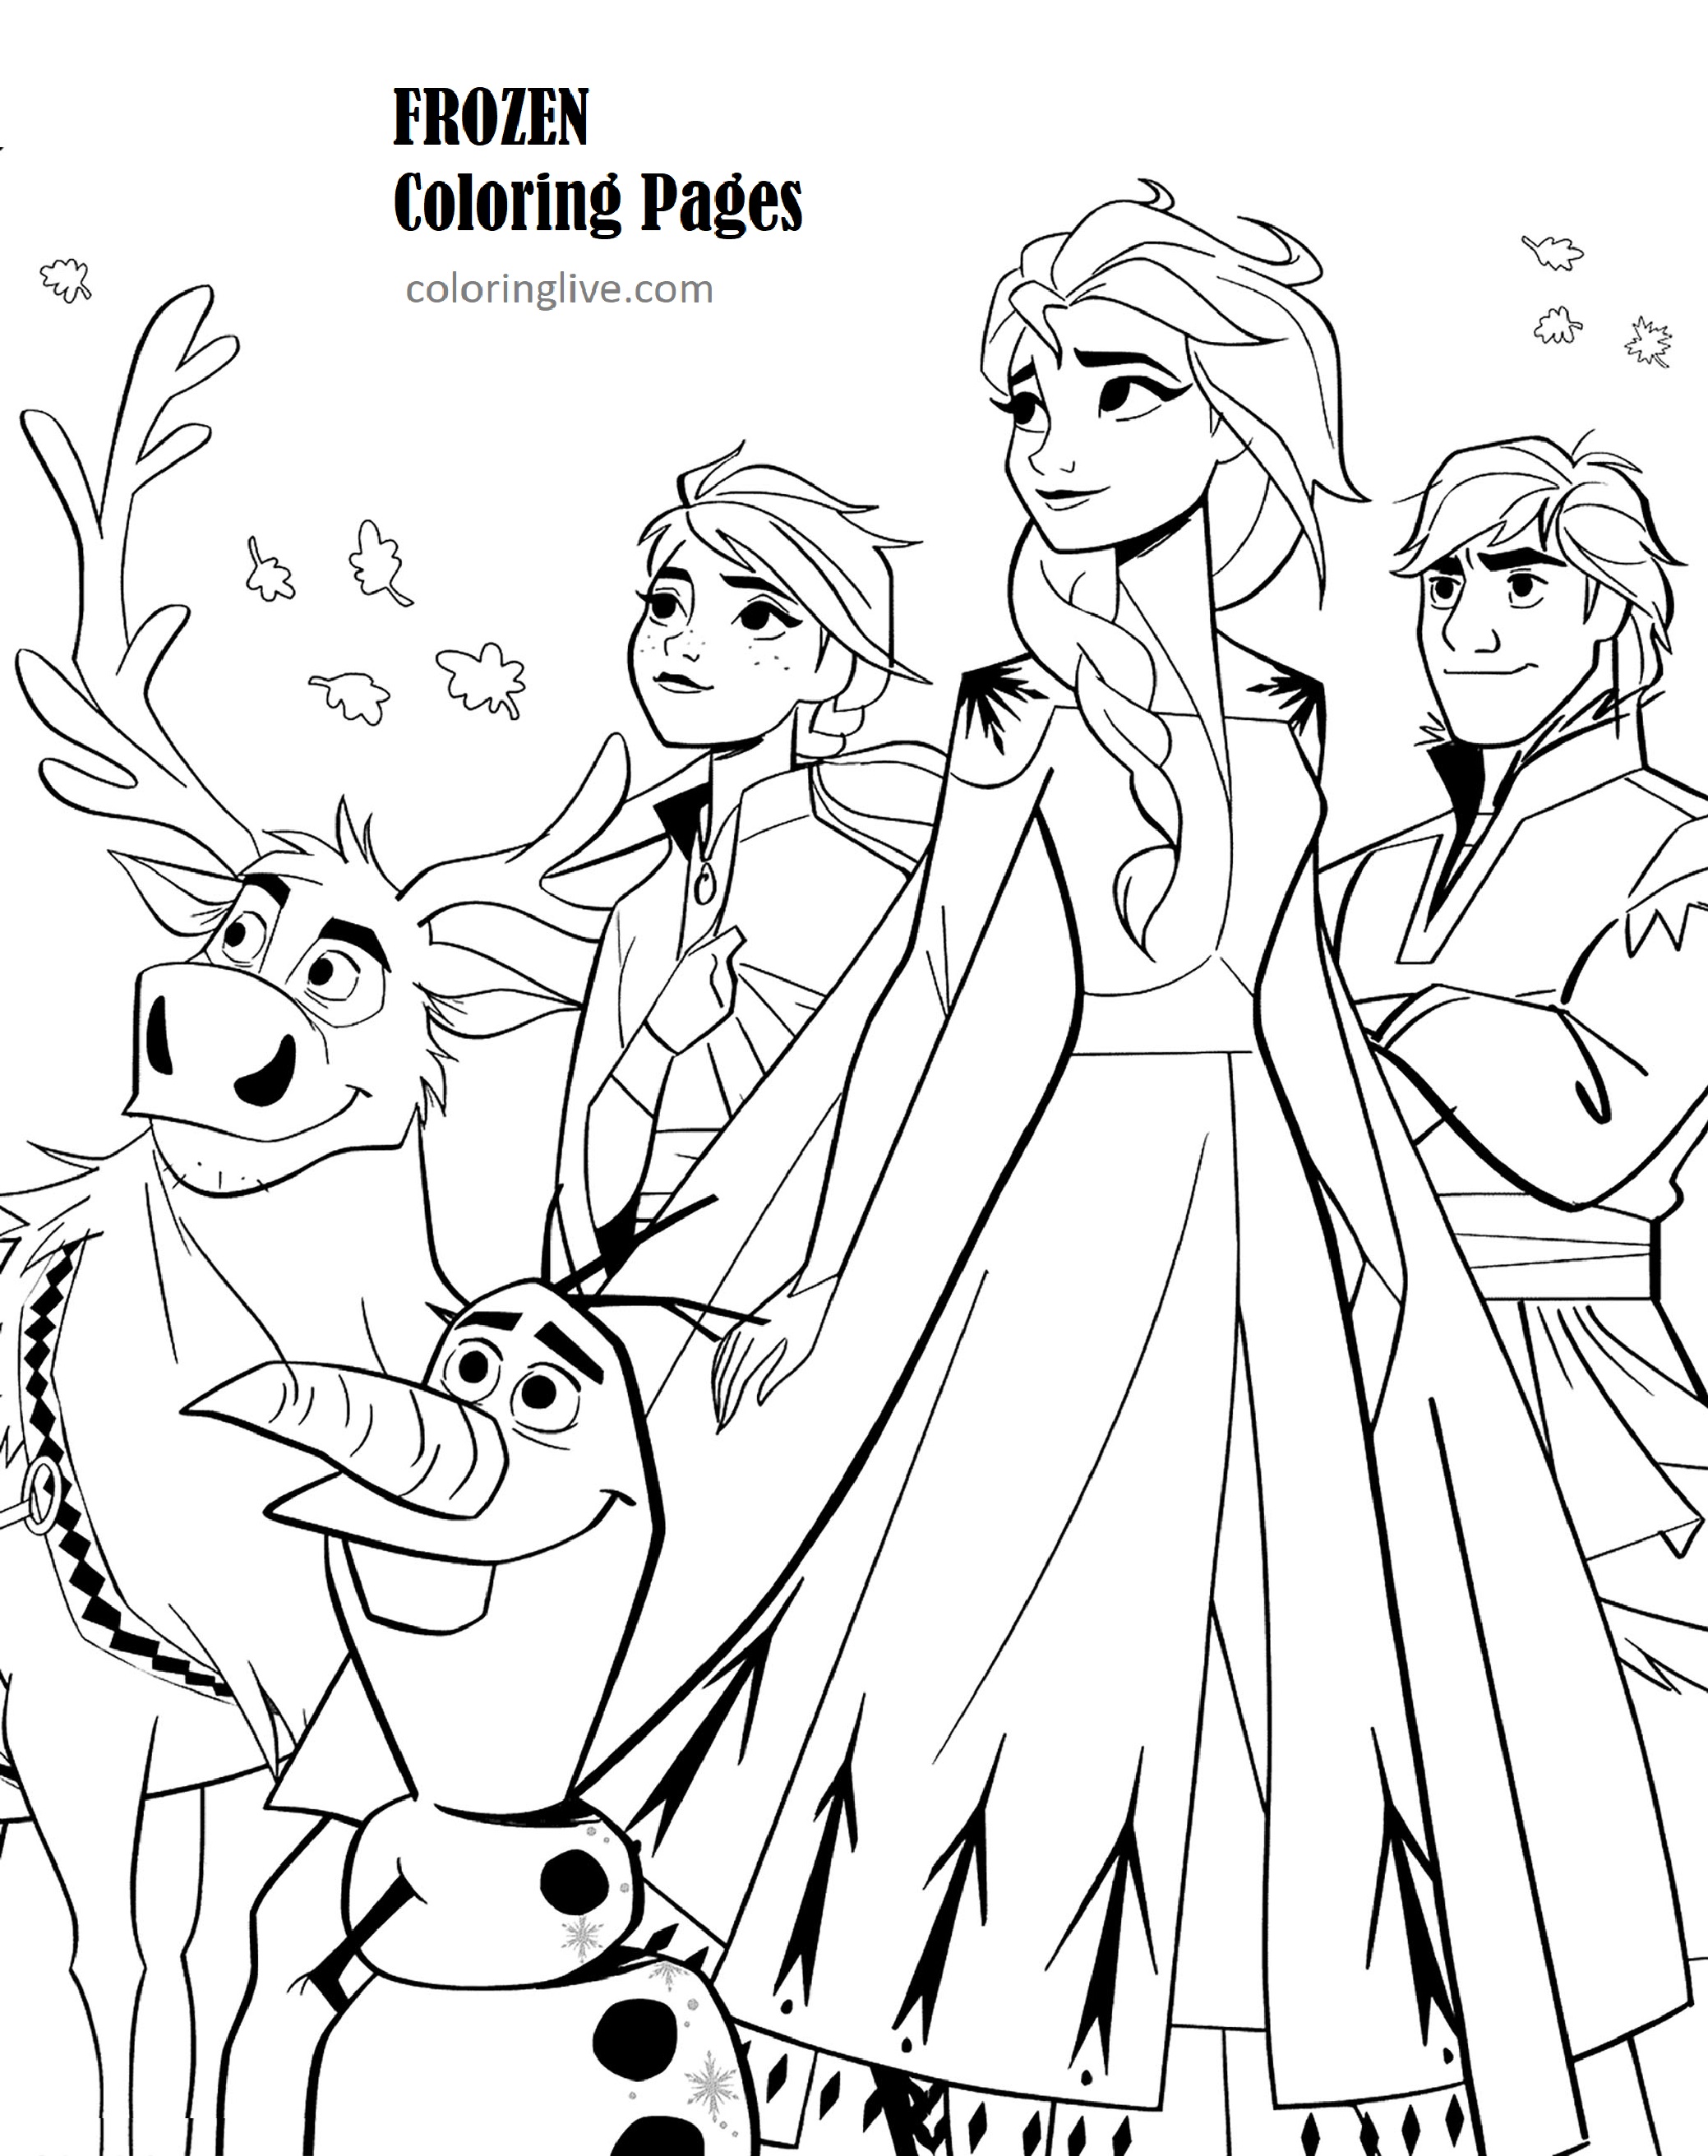 Printable Frozen 2 (Incredible Elsa) Coloring Page for kids.